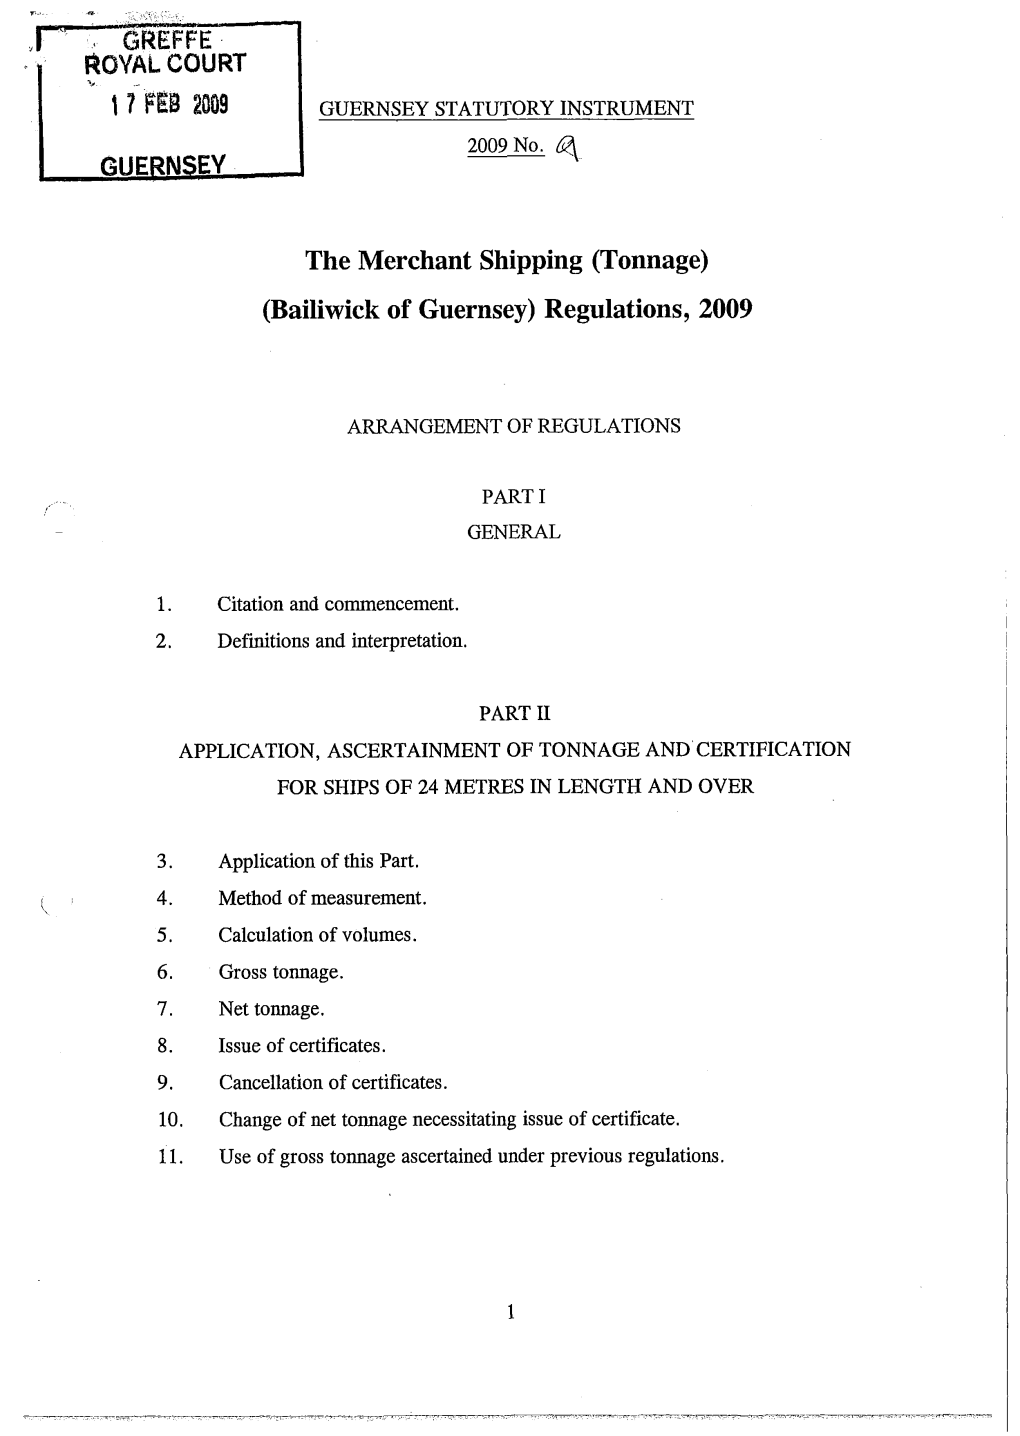 The Merchant Shipping (Tonnage) (Bailiwick of Guernsey) Regulations, 2009